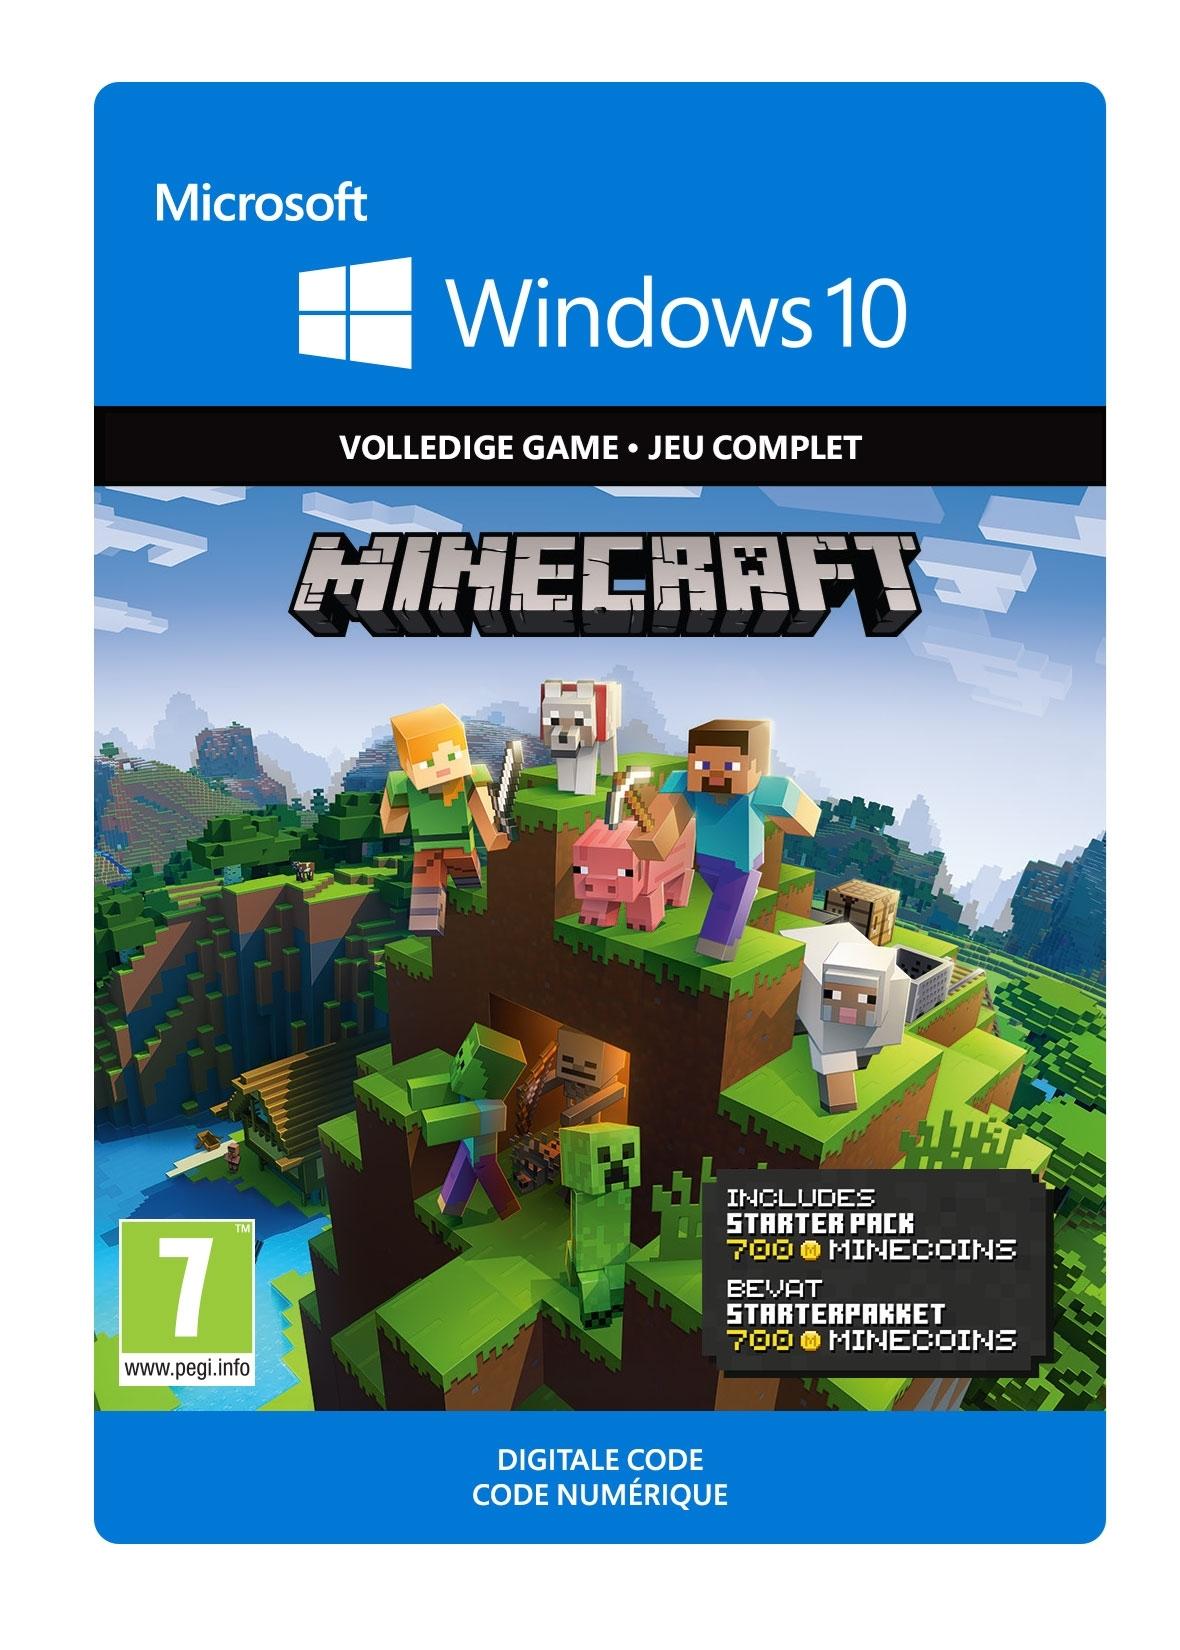 Minecraft Windows 10 Starter Collection - Win10 - Game | 2WY-00002 (fead2954-2b17-d04b-8615-641491f10767)